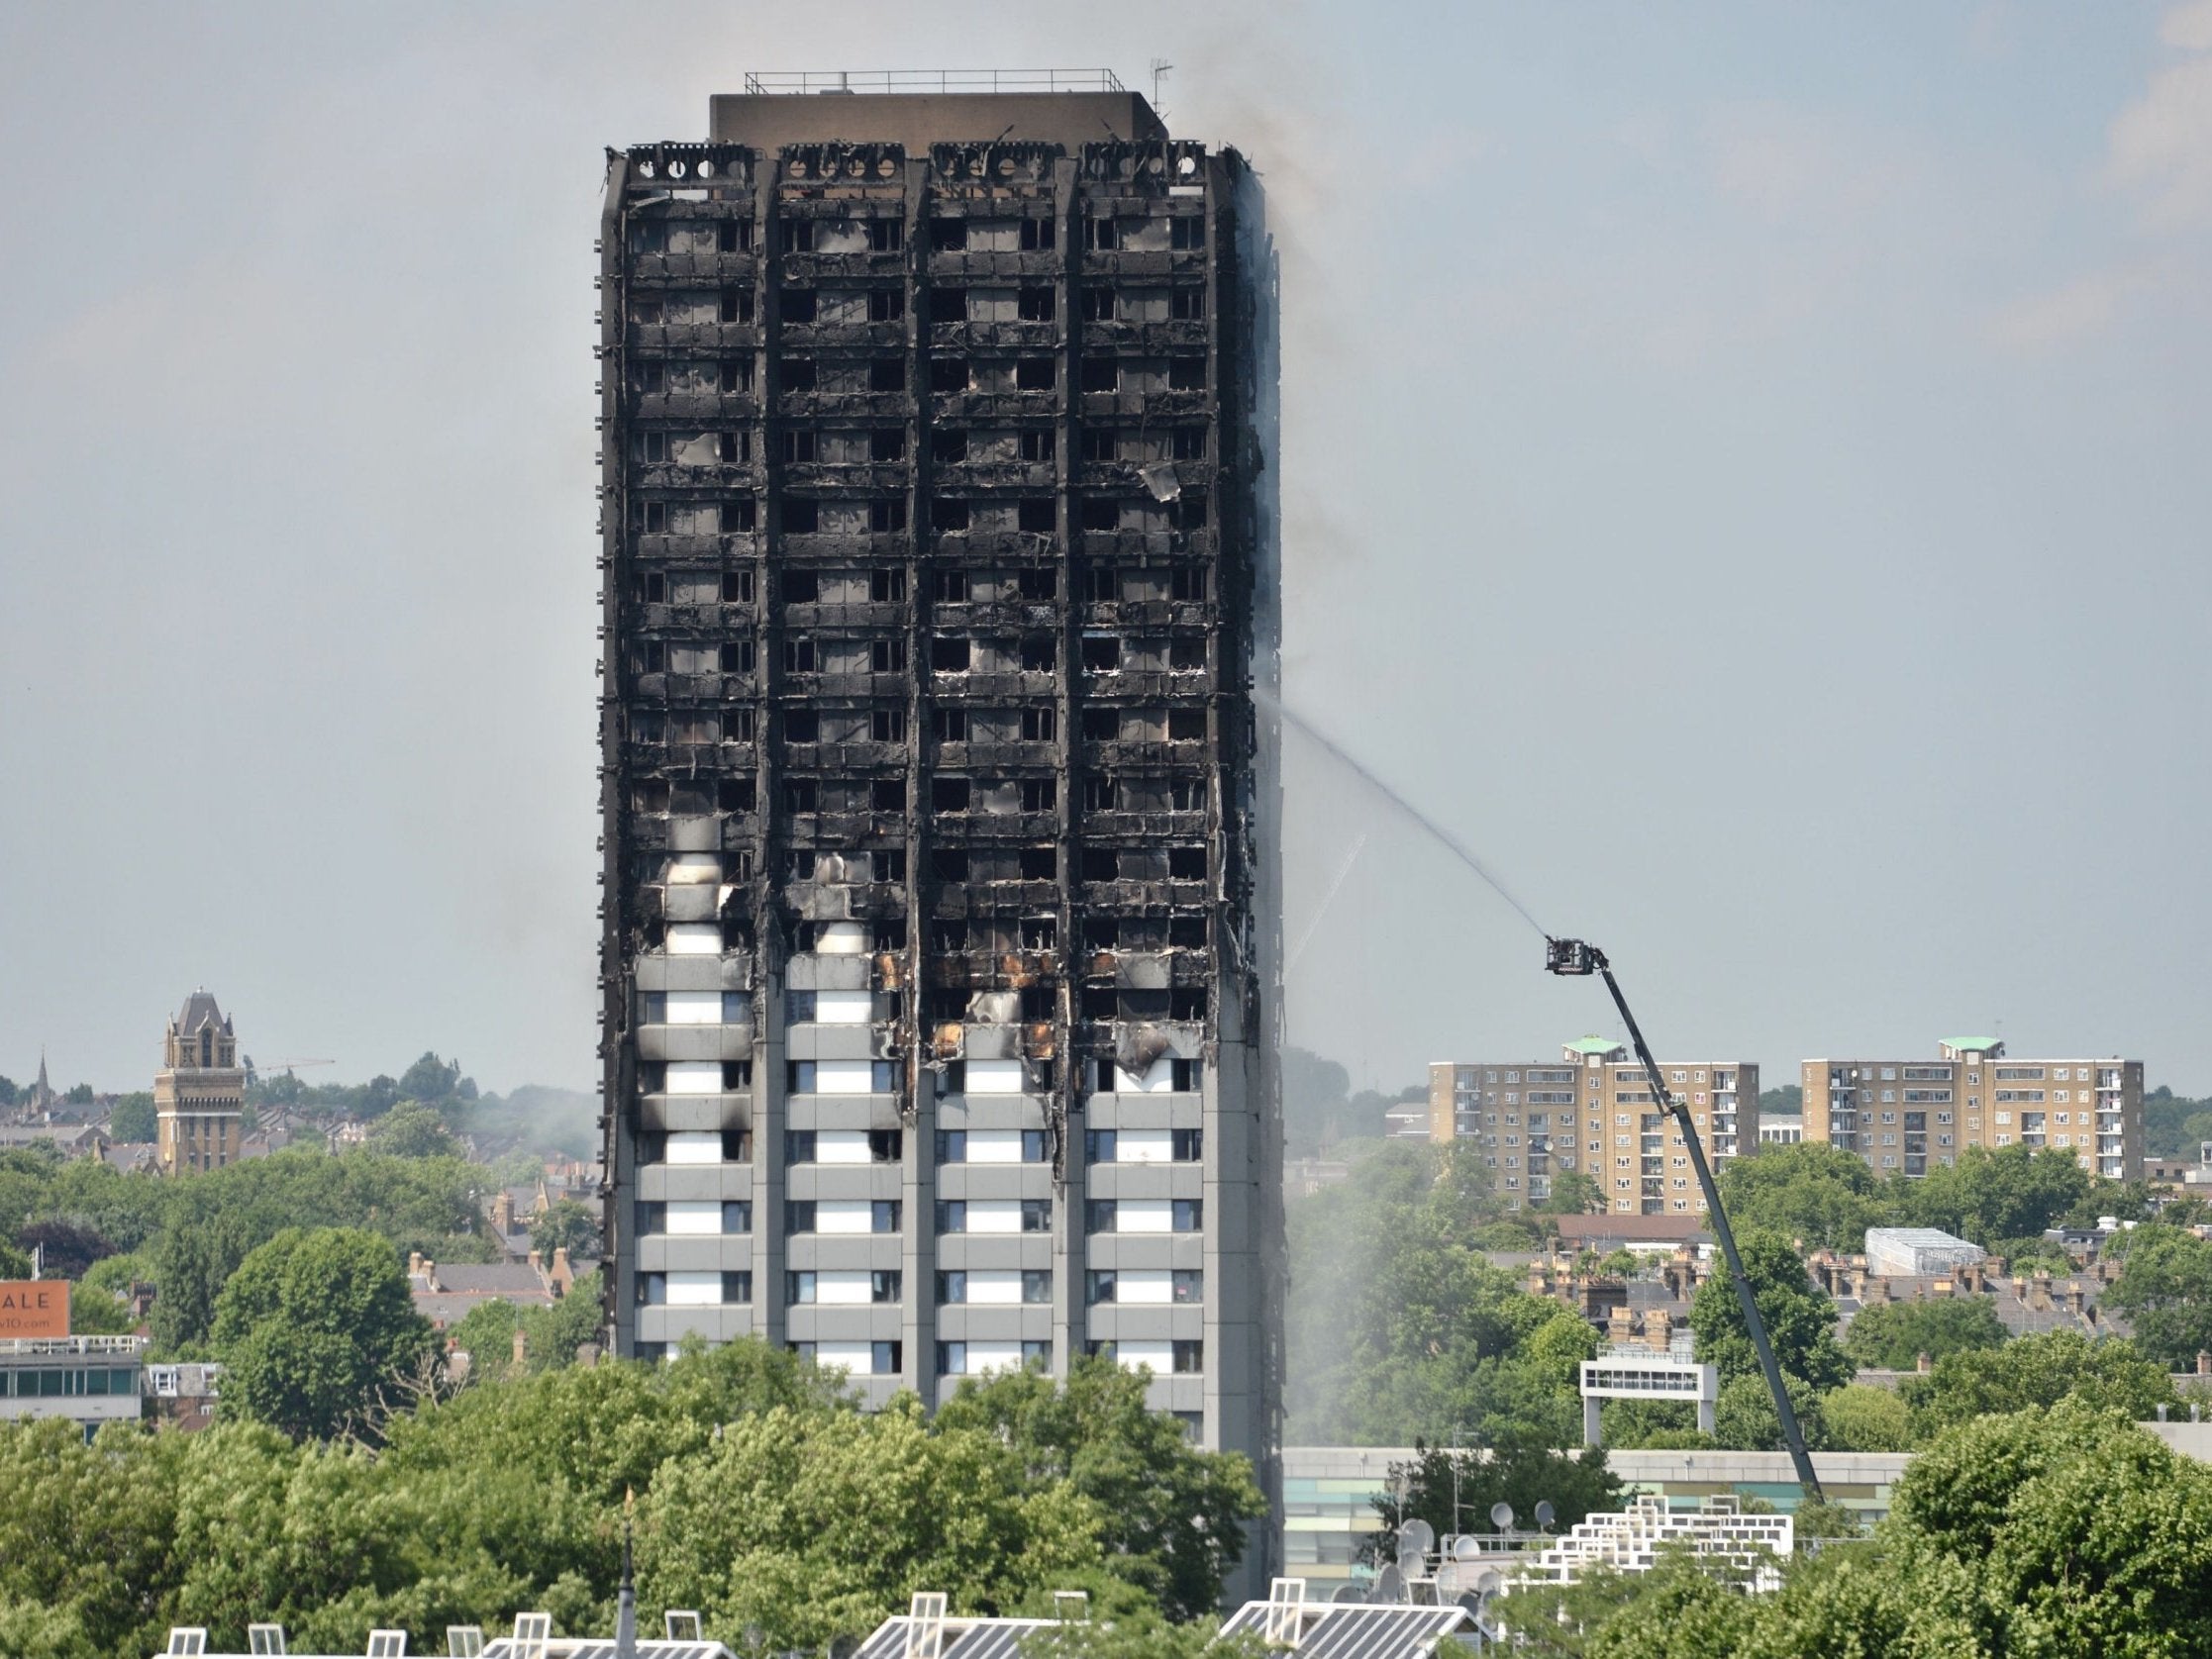 Ministers accused of 'utter complacency' to prepare fire services after Grenfell fire